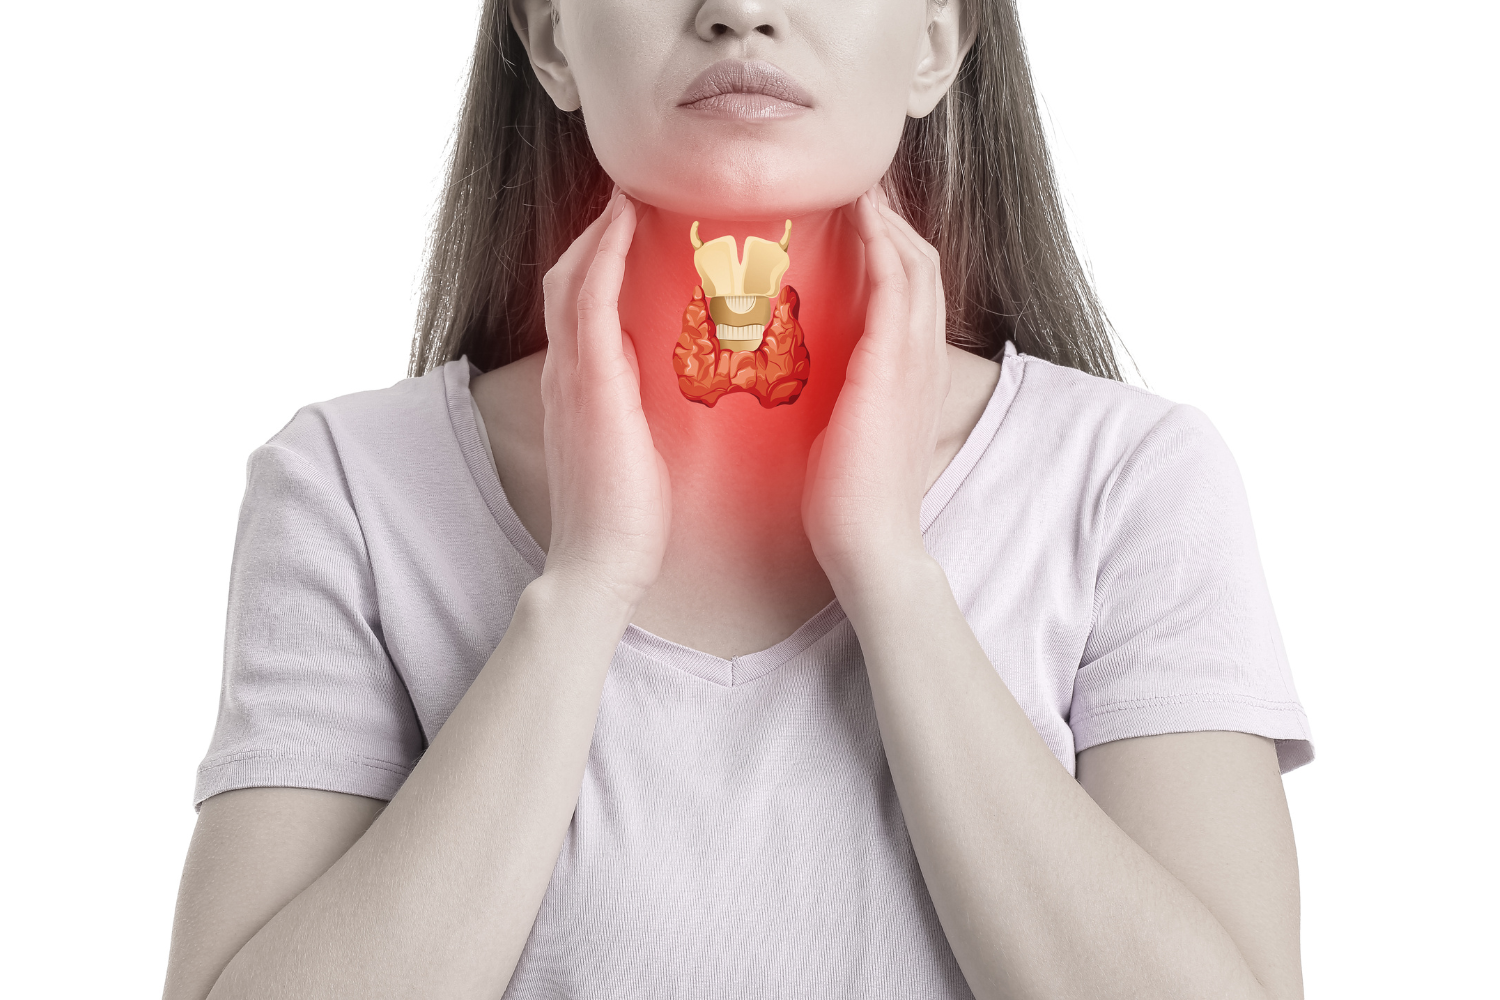 How to Know if You Have Thyroid Problems?